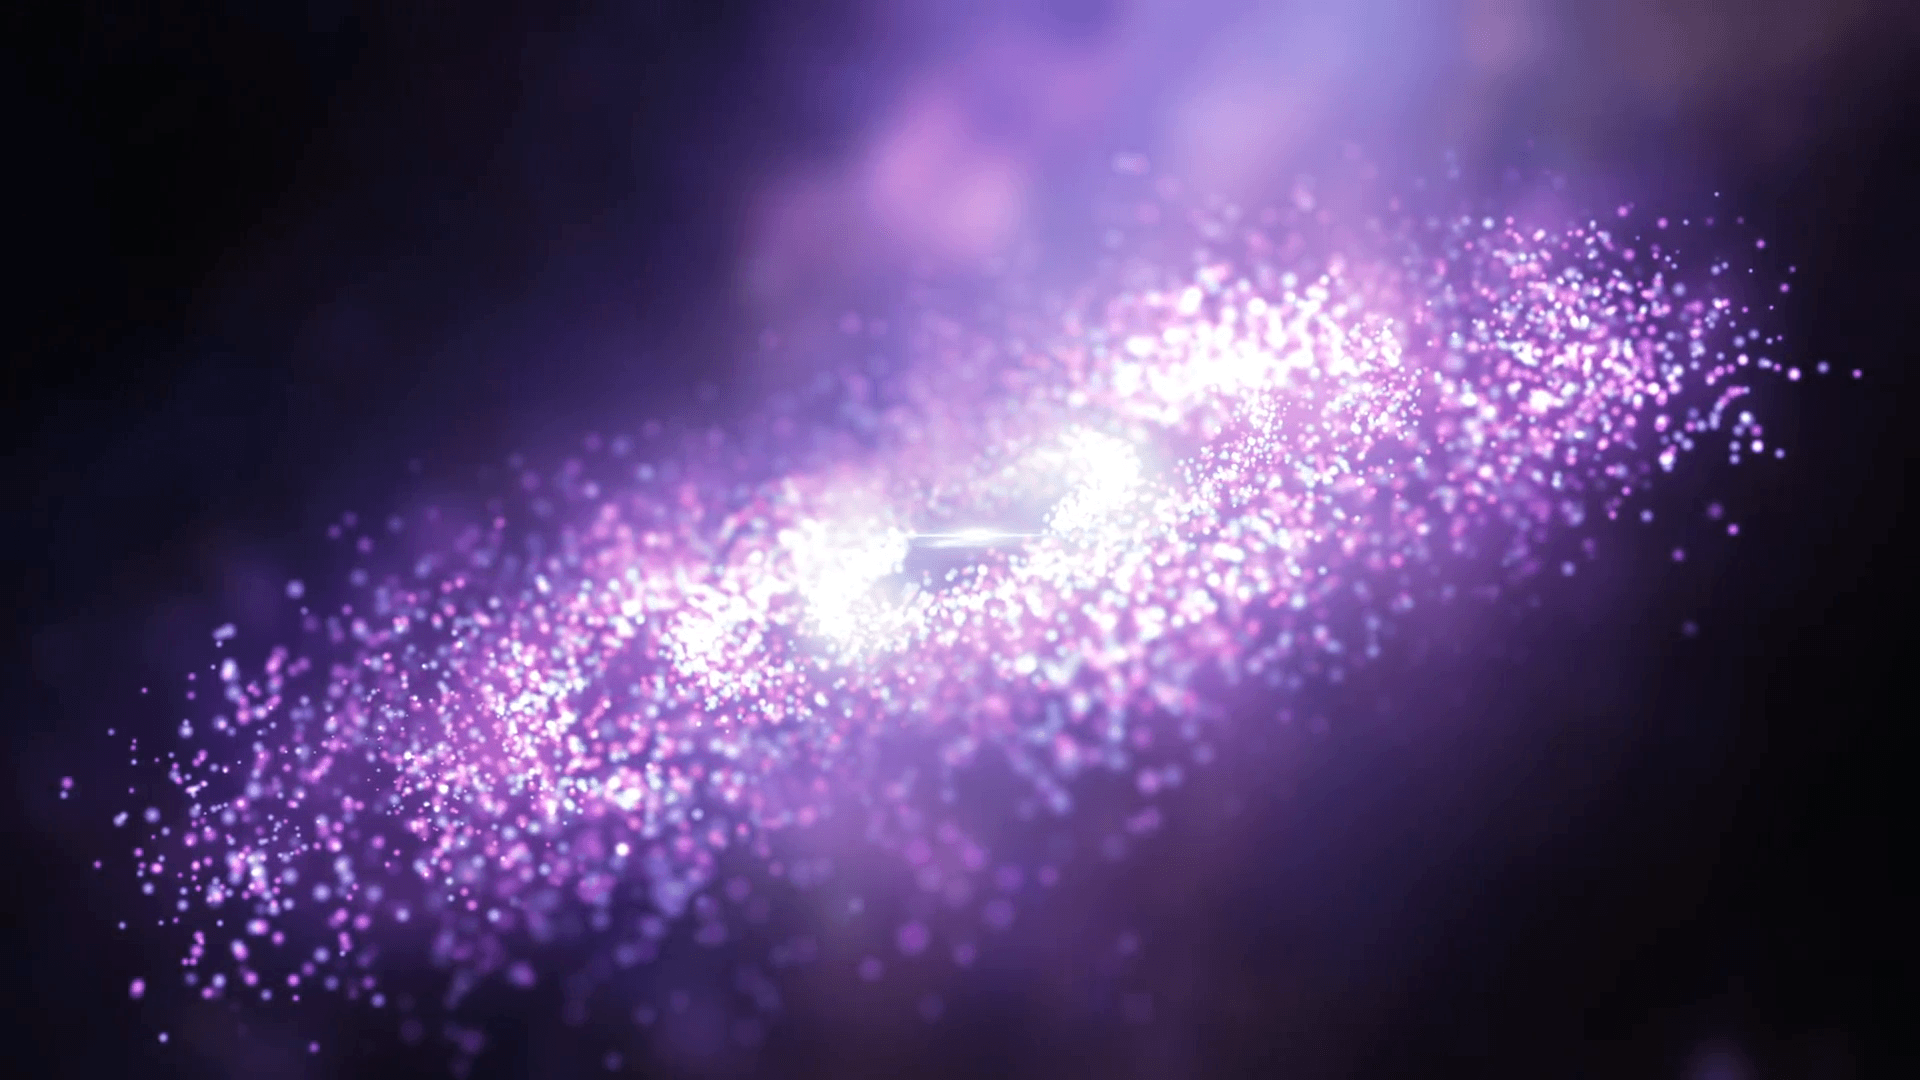 Background Animated Galaxy Wallpaper